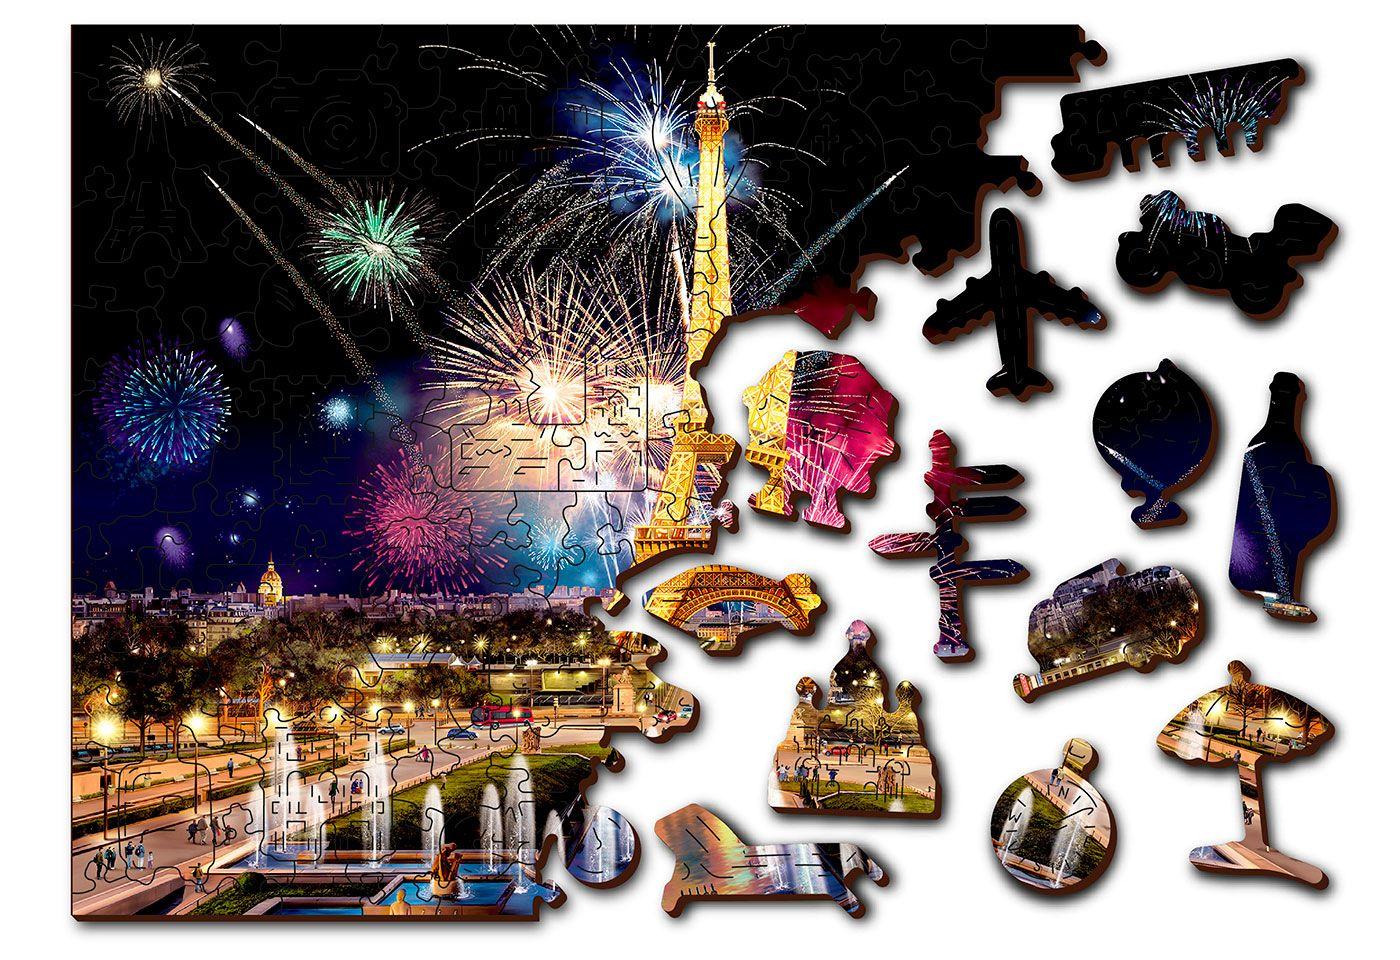 Wooden Puzzle with figurines - Spring in Paris XL 600 pieces